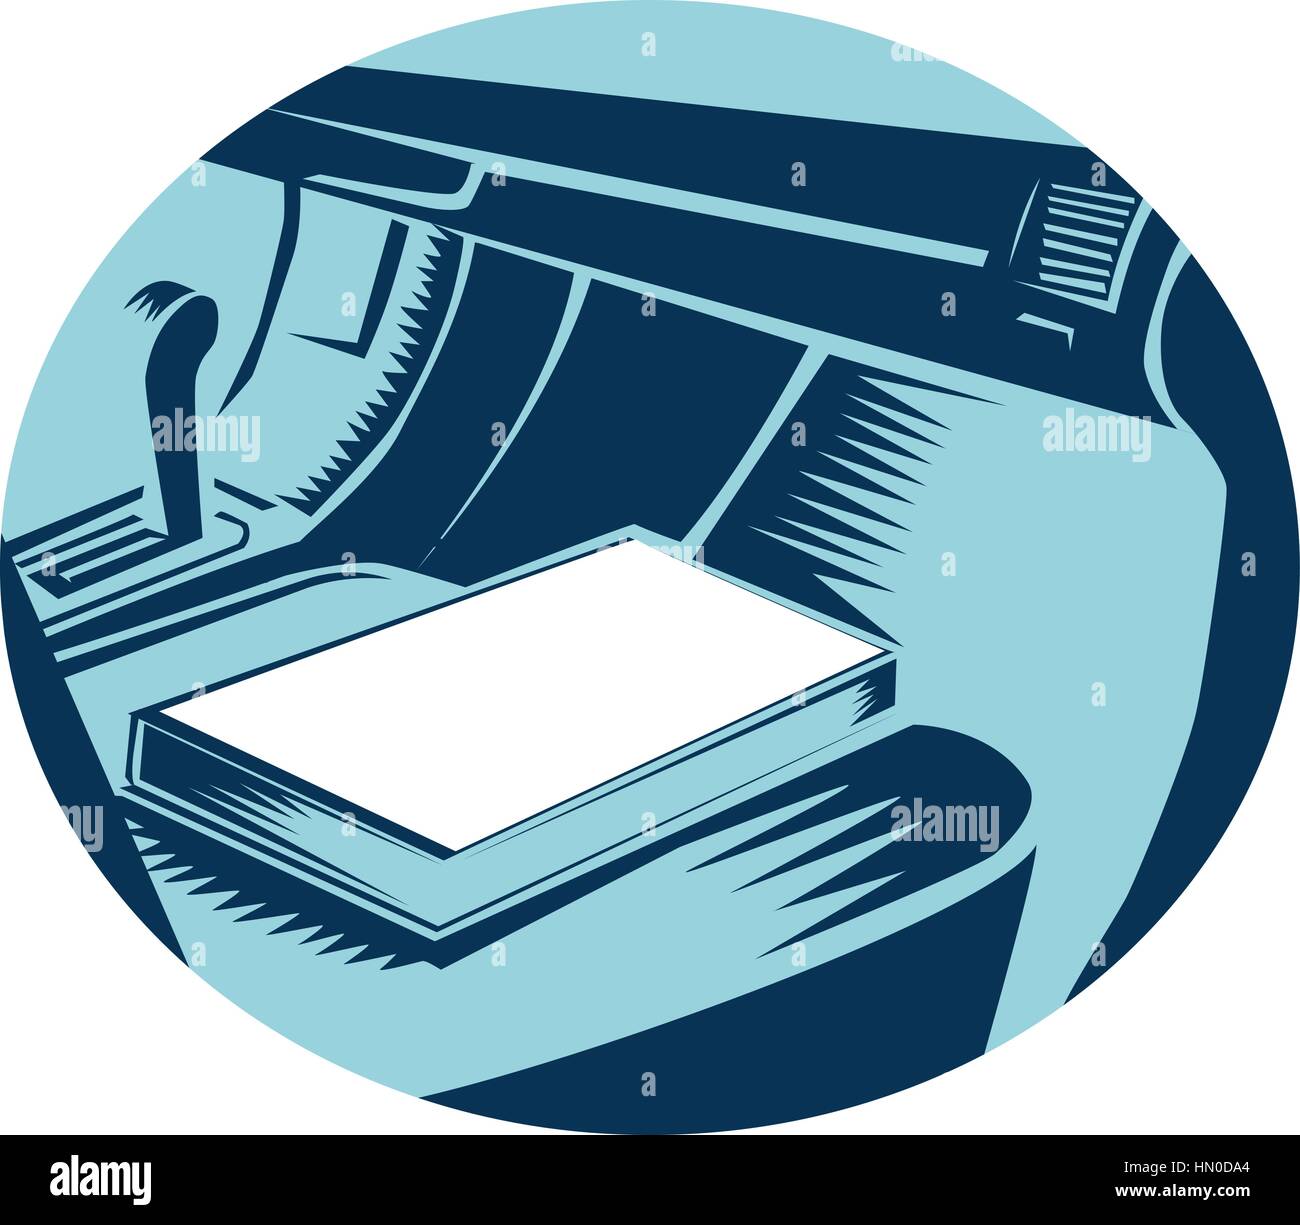 Illustration showing Close up of The Book sitting on the passenger seat of car set inside oval shape done in retro woodcut style. Stock Vector